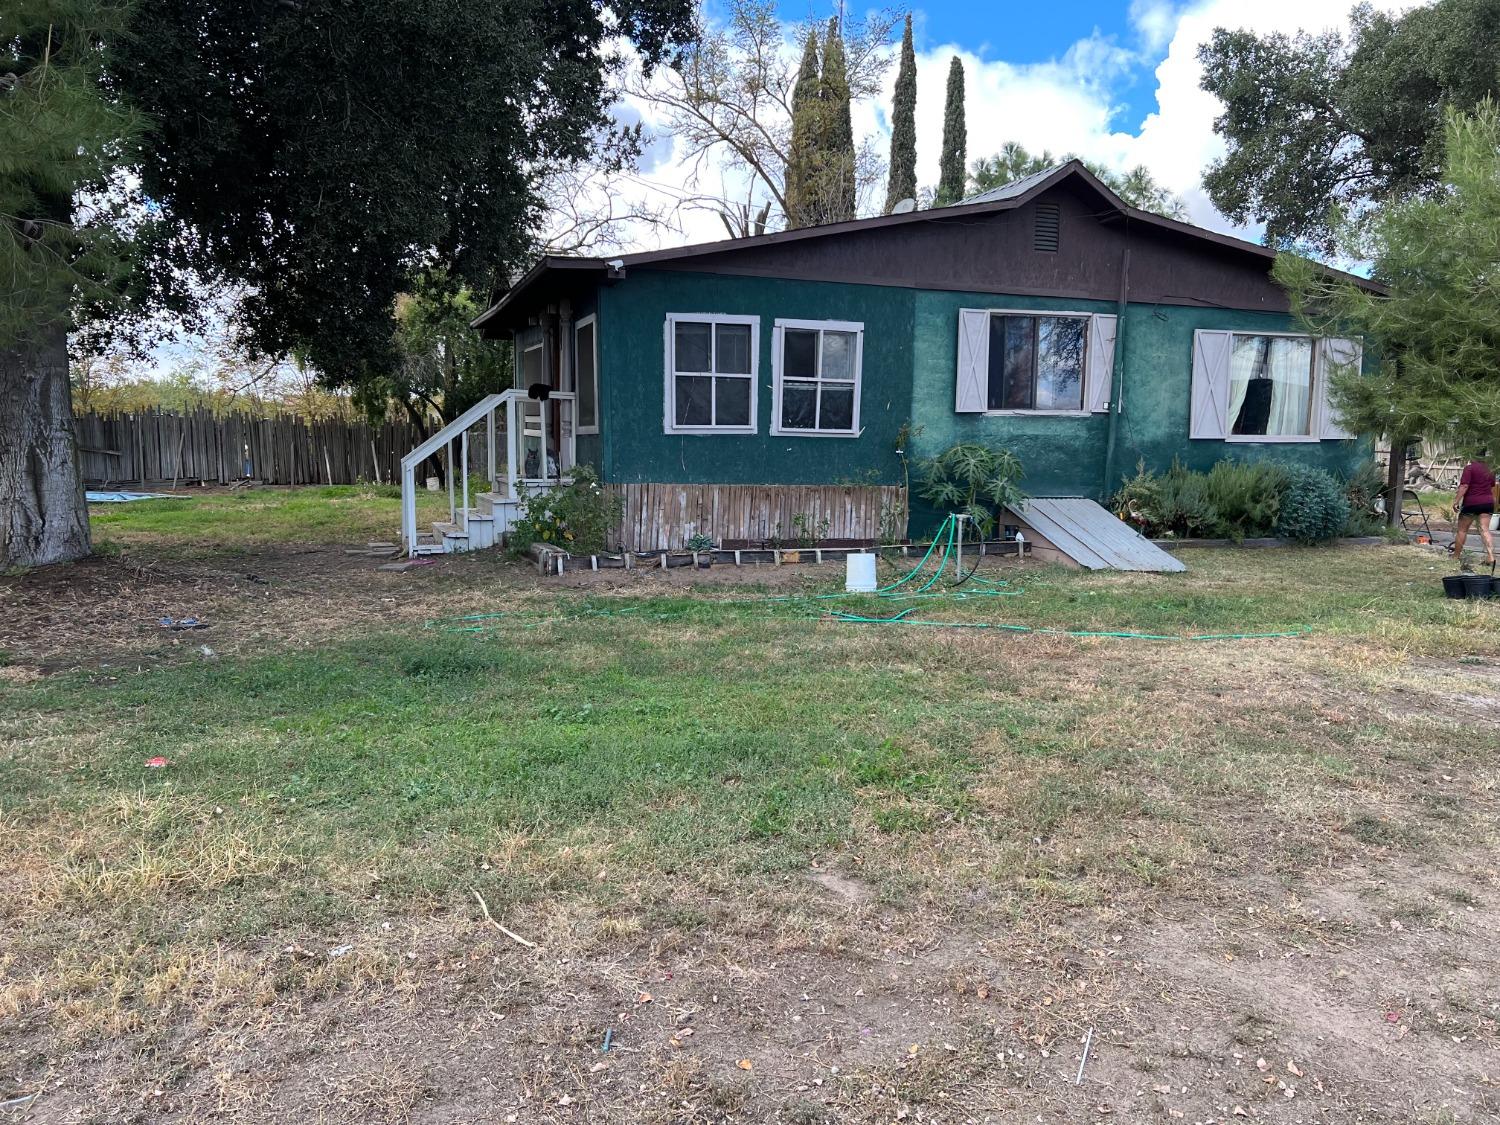 Ranchette in the city of Atwater! Beautiful trees and plenty of room for the country lifestyle! Make